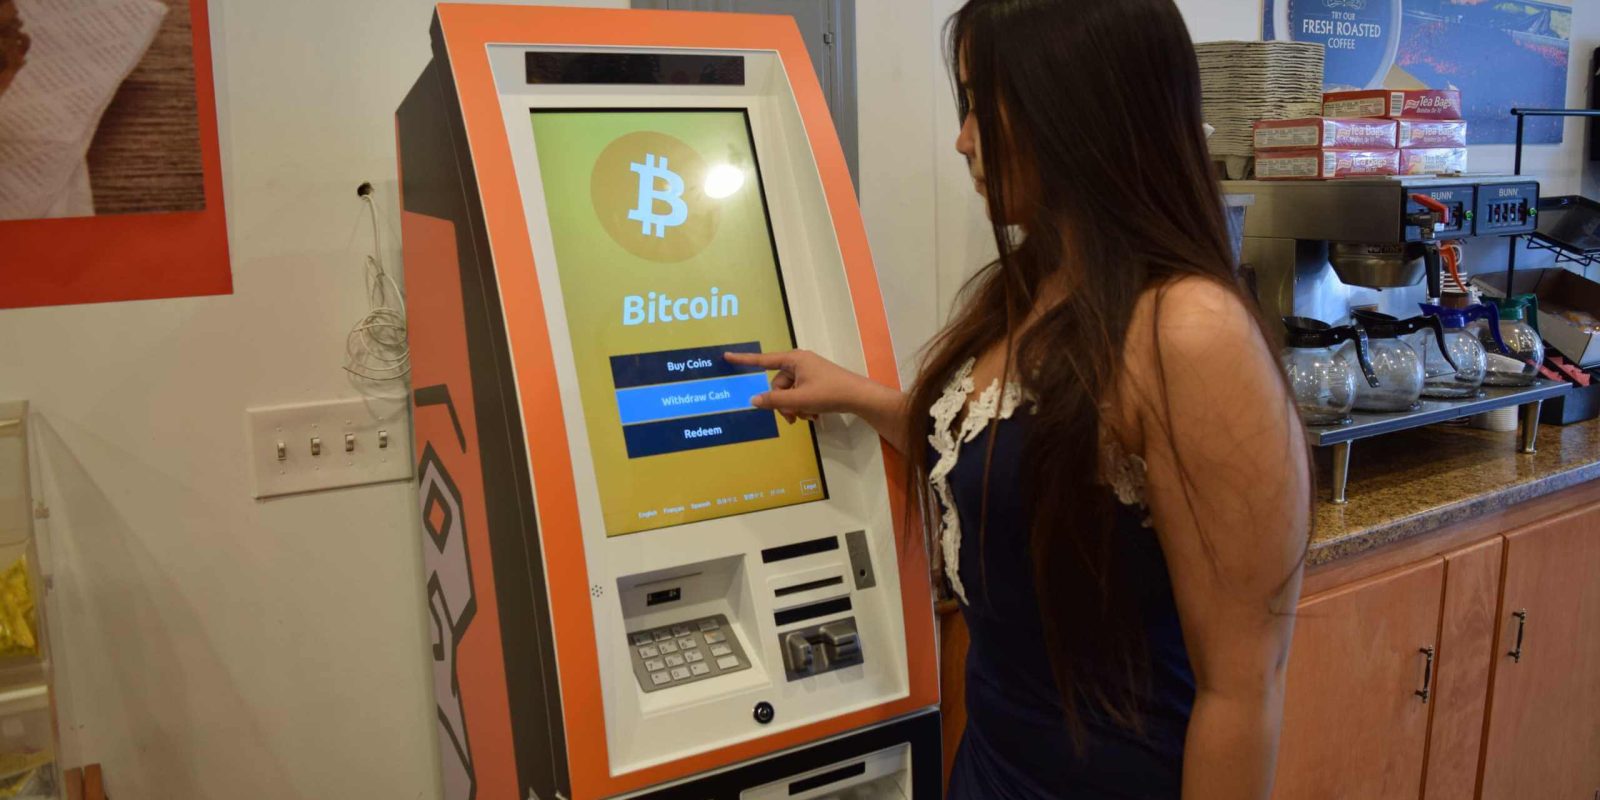 Sell Bitcoin Using ATM